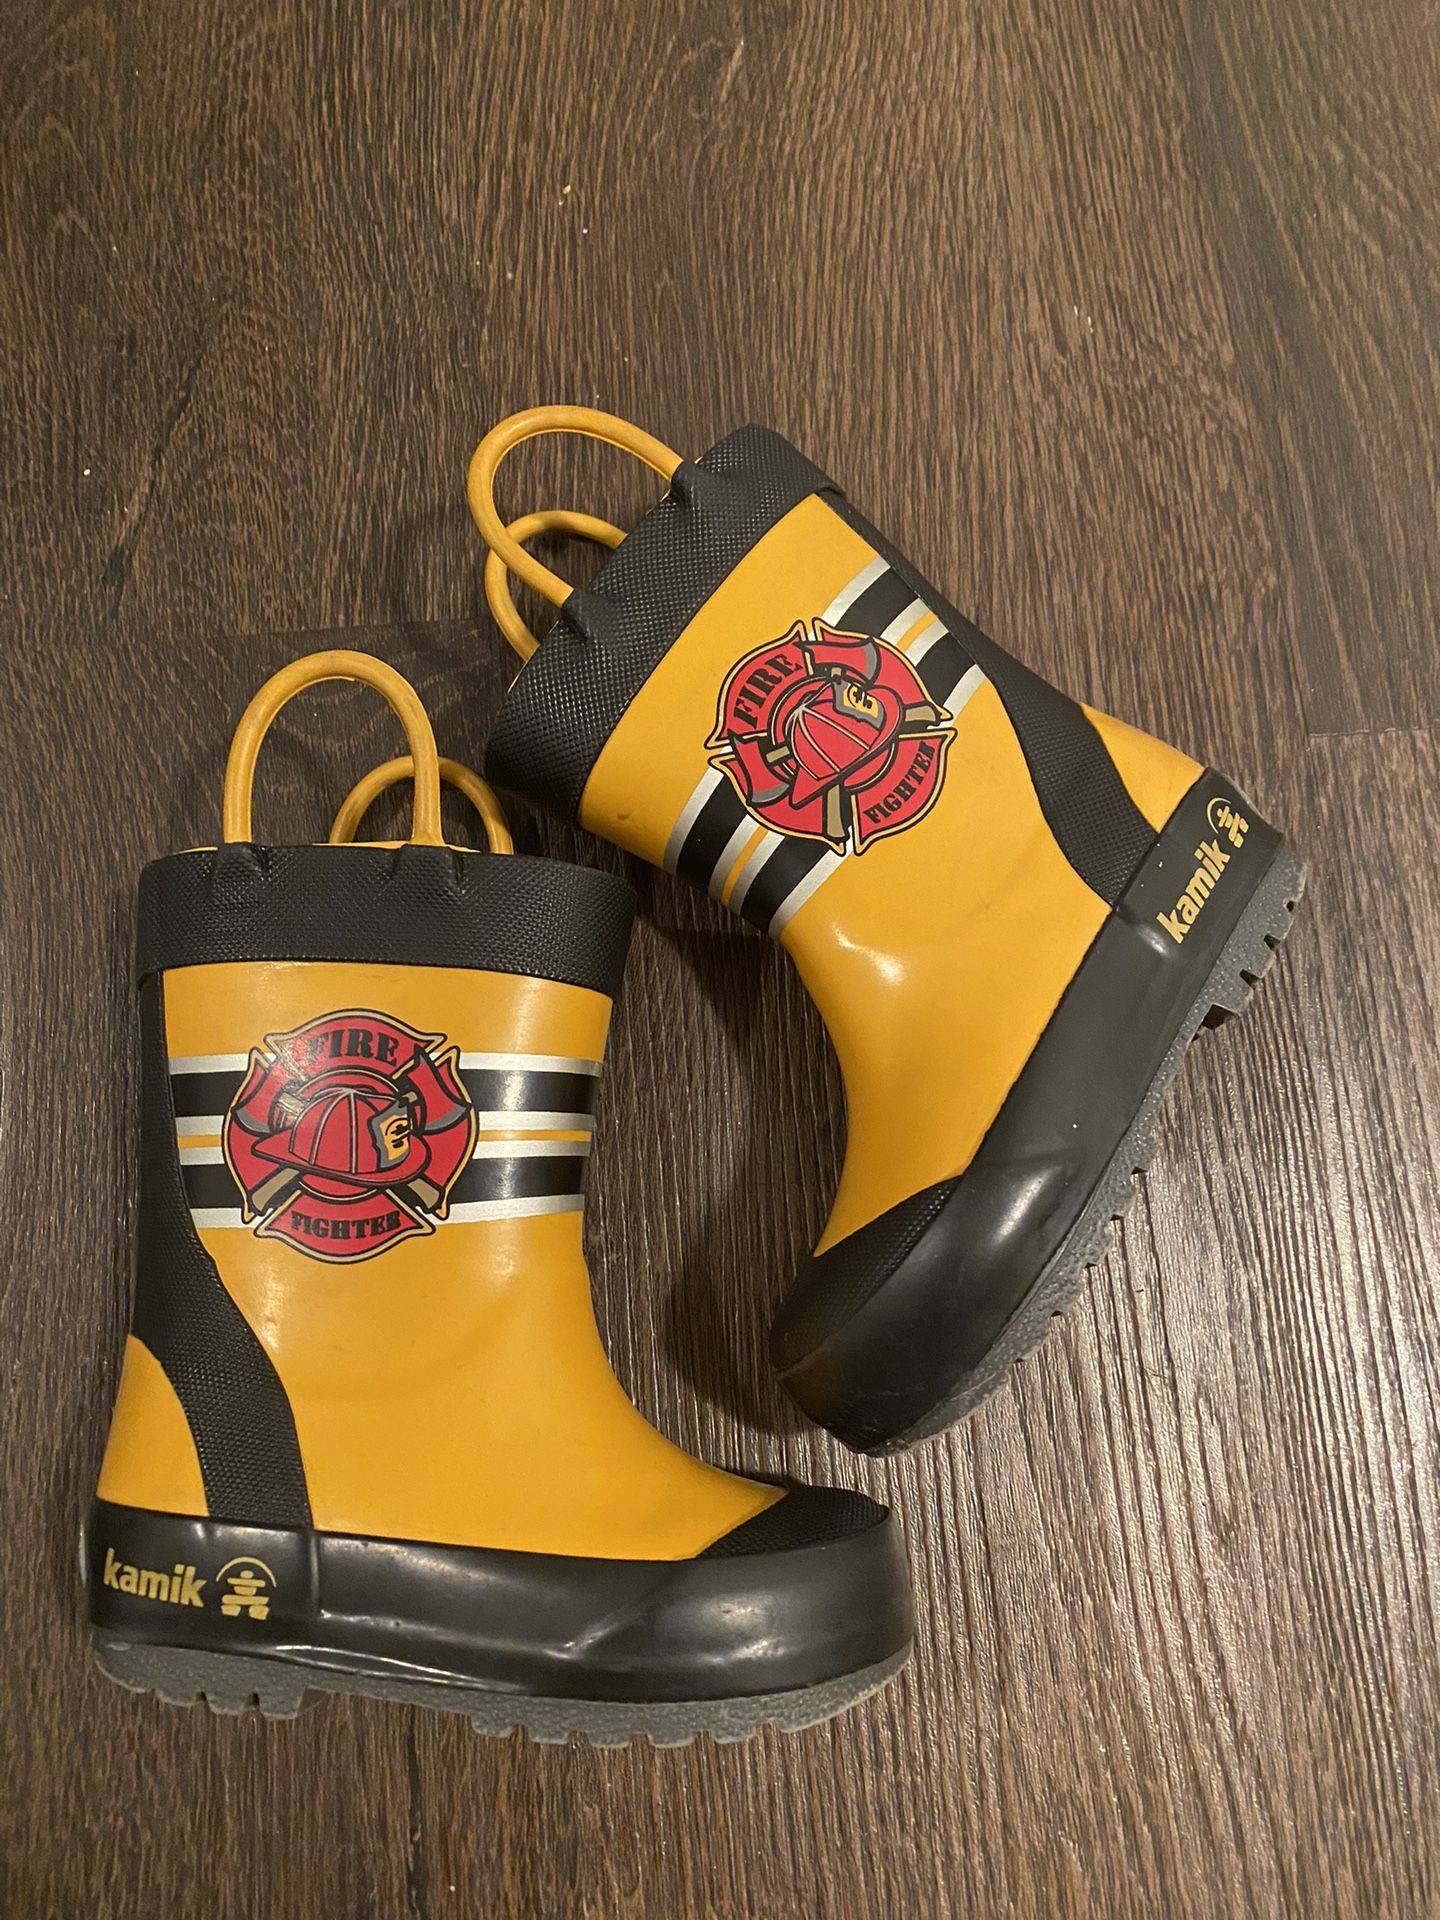 No Boys Firefighter Rain Boots Size 5 Toddler By Kamik 